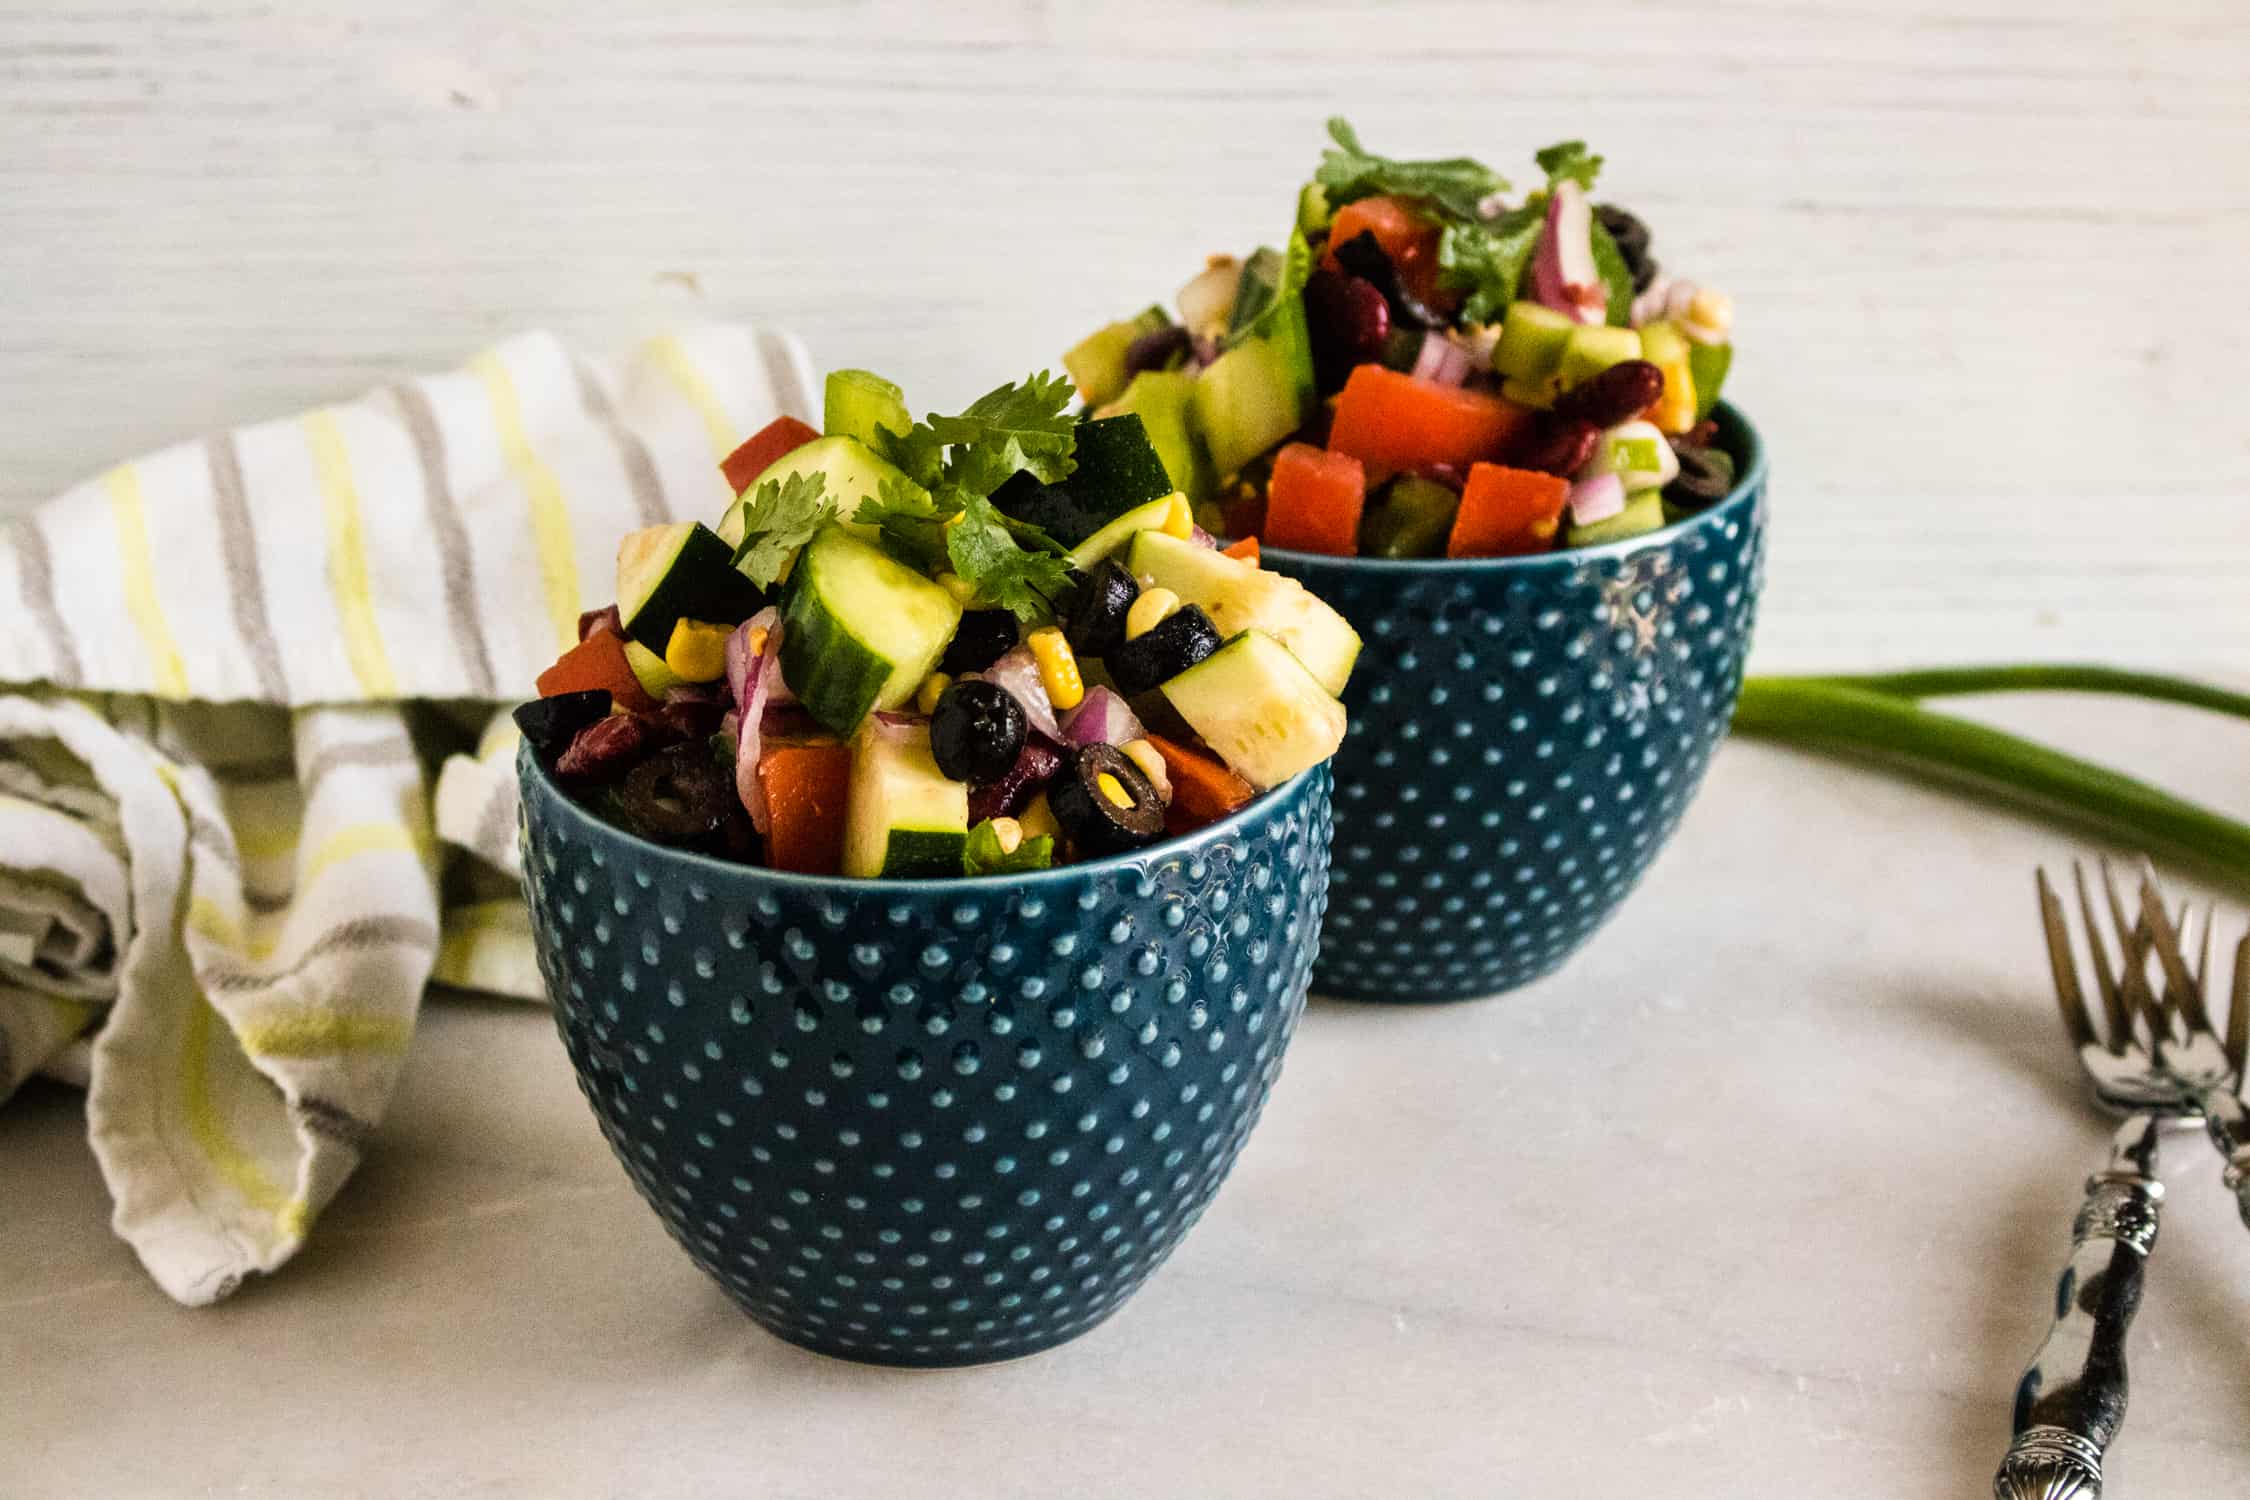 Picnic salad served in two blue bowls with forks and a kitchen towel beaide